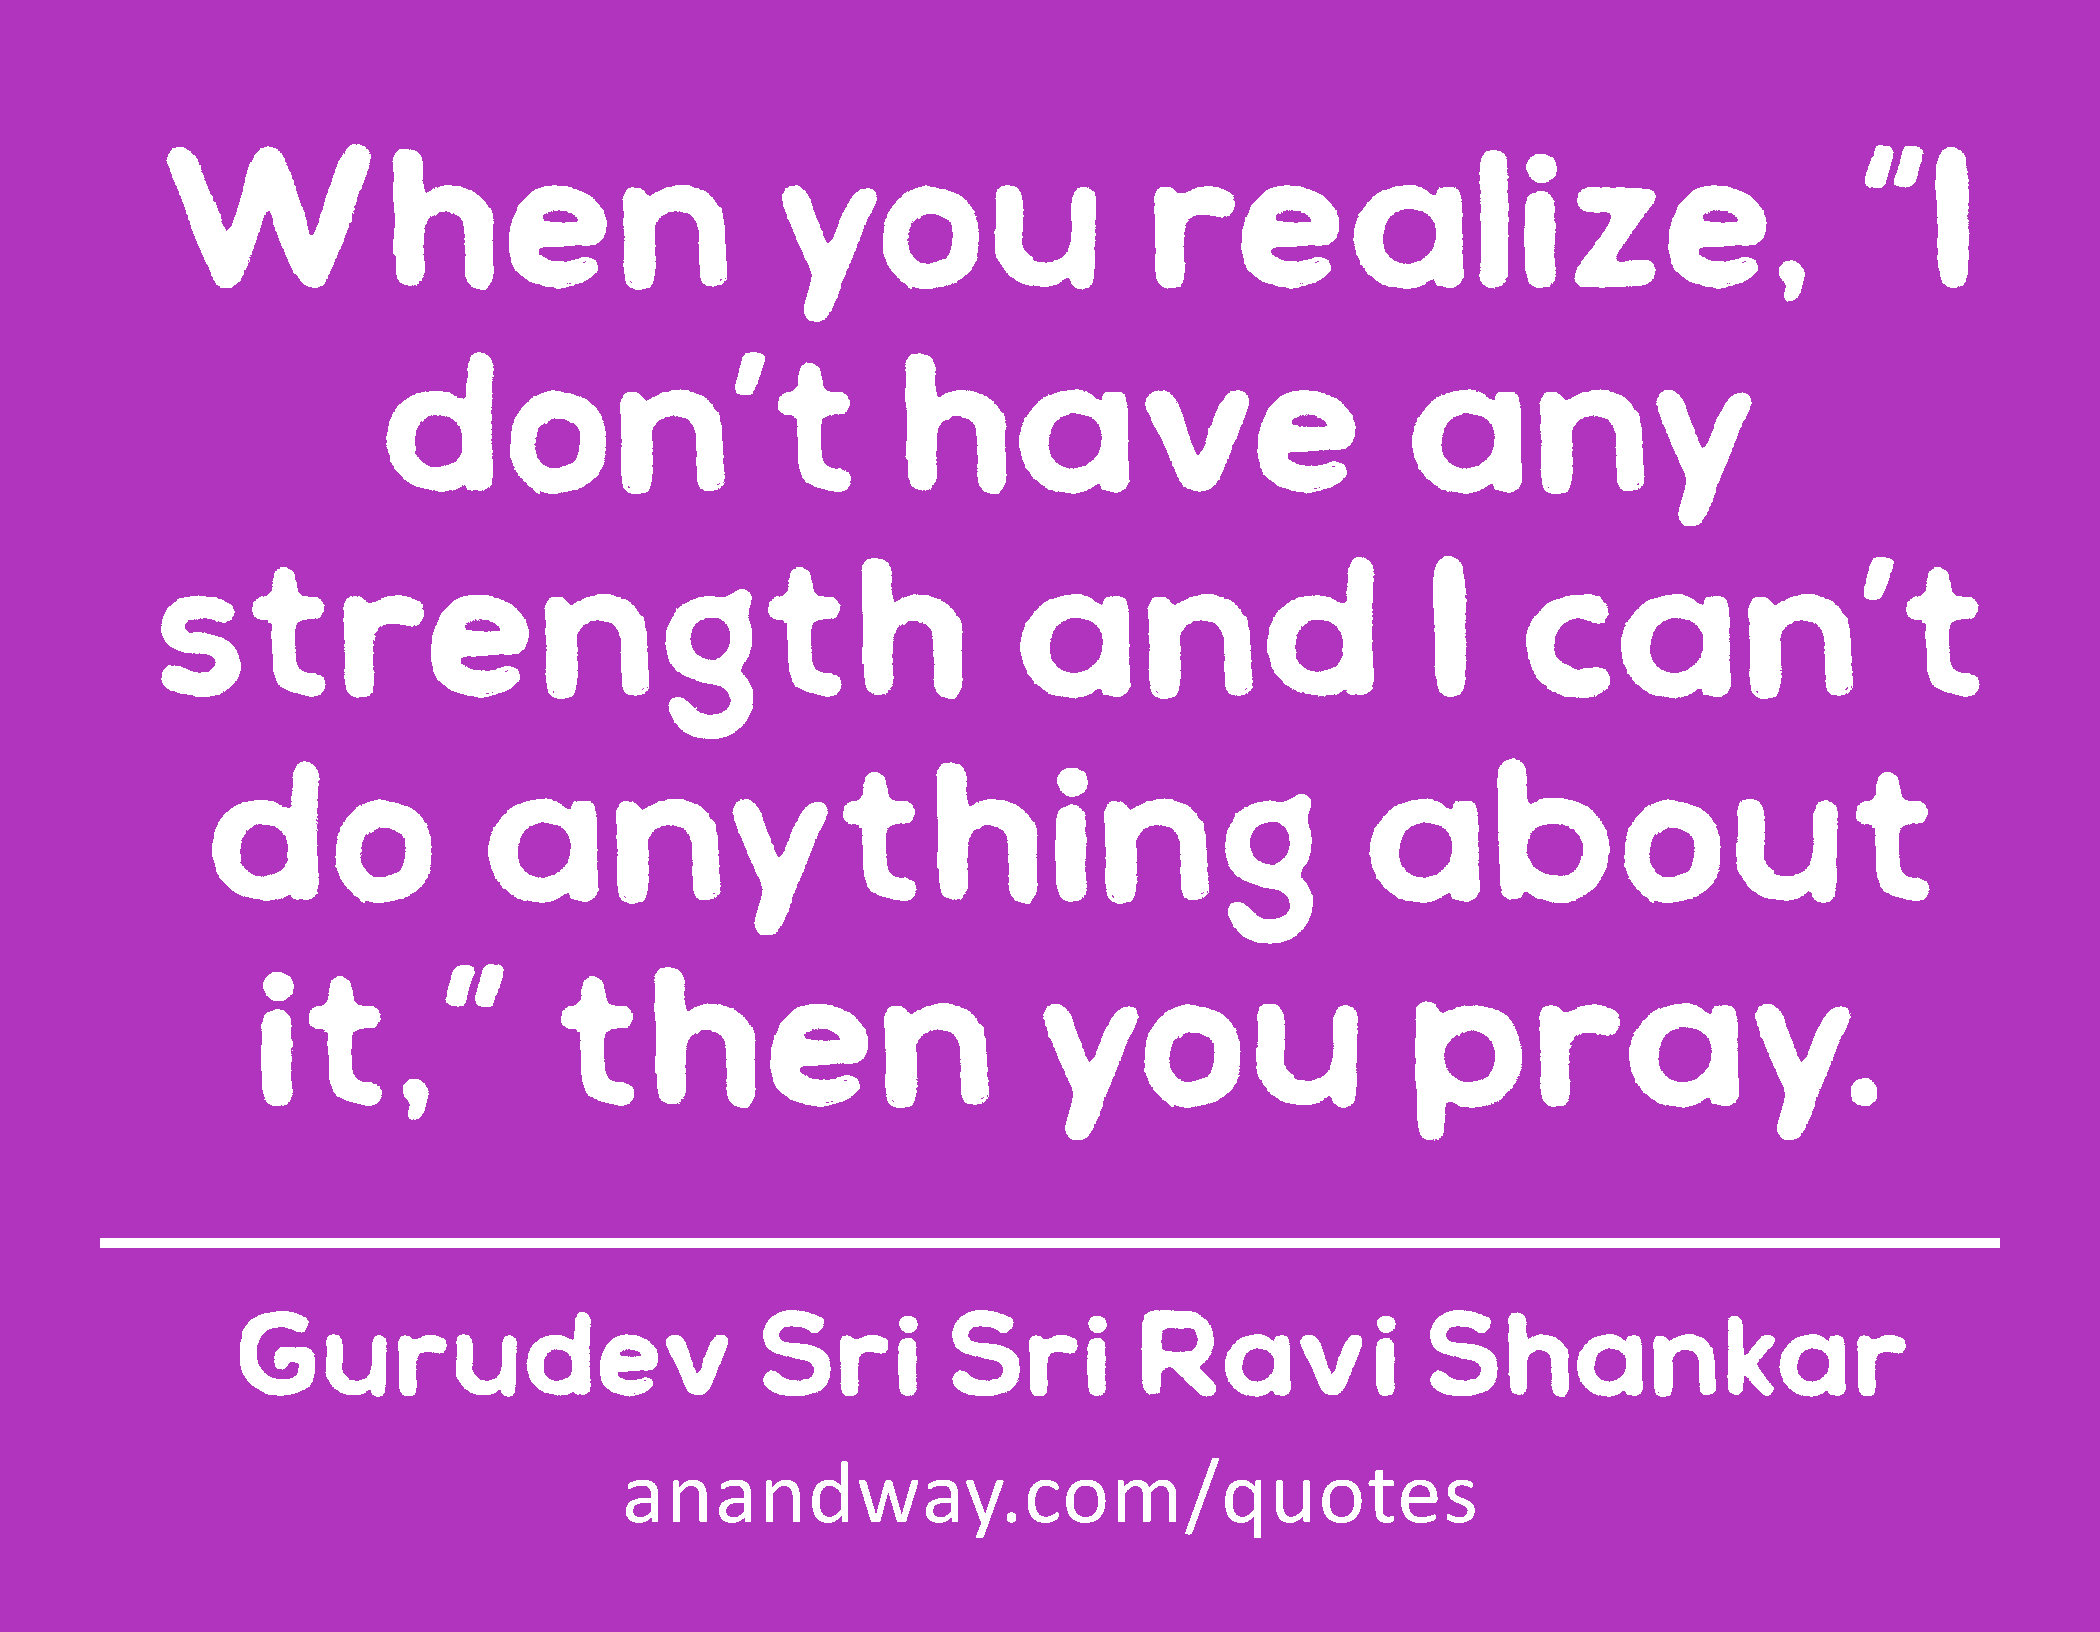 When you realize, “I don’t have any strength and I can’t do anything about it,” then you pray. 
 -Gurudev Sri Sri Ravi Shankar